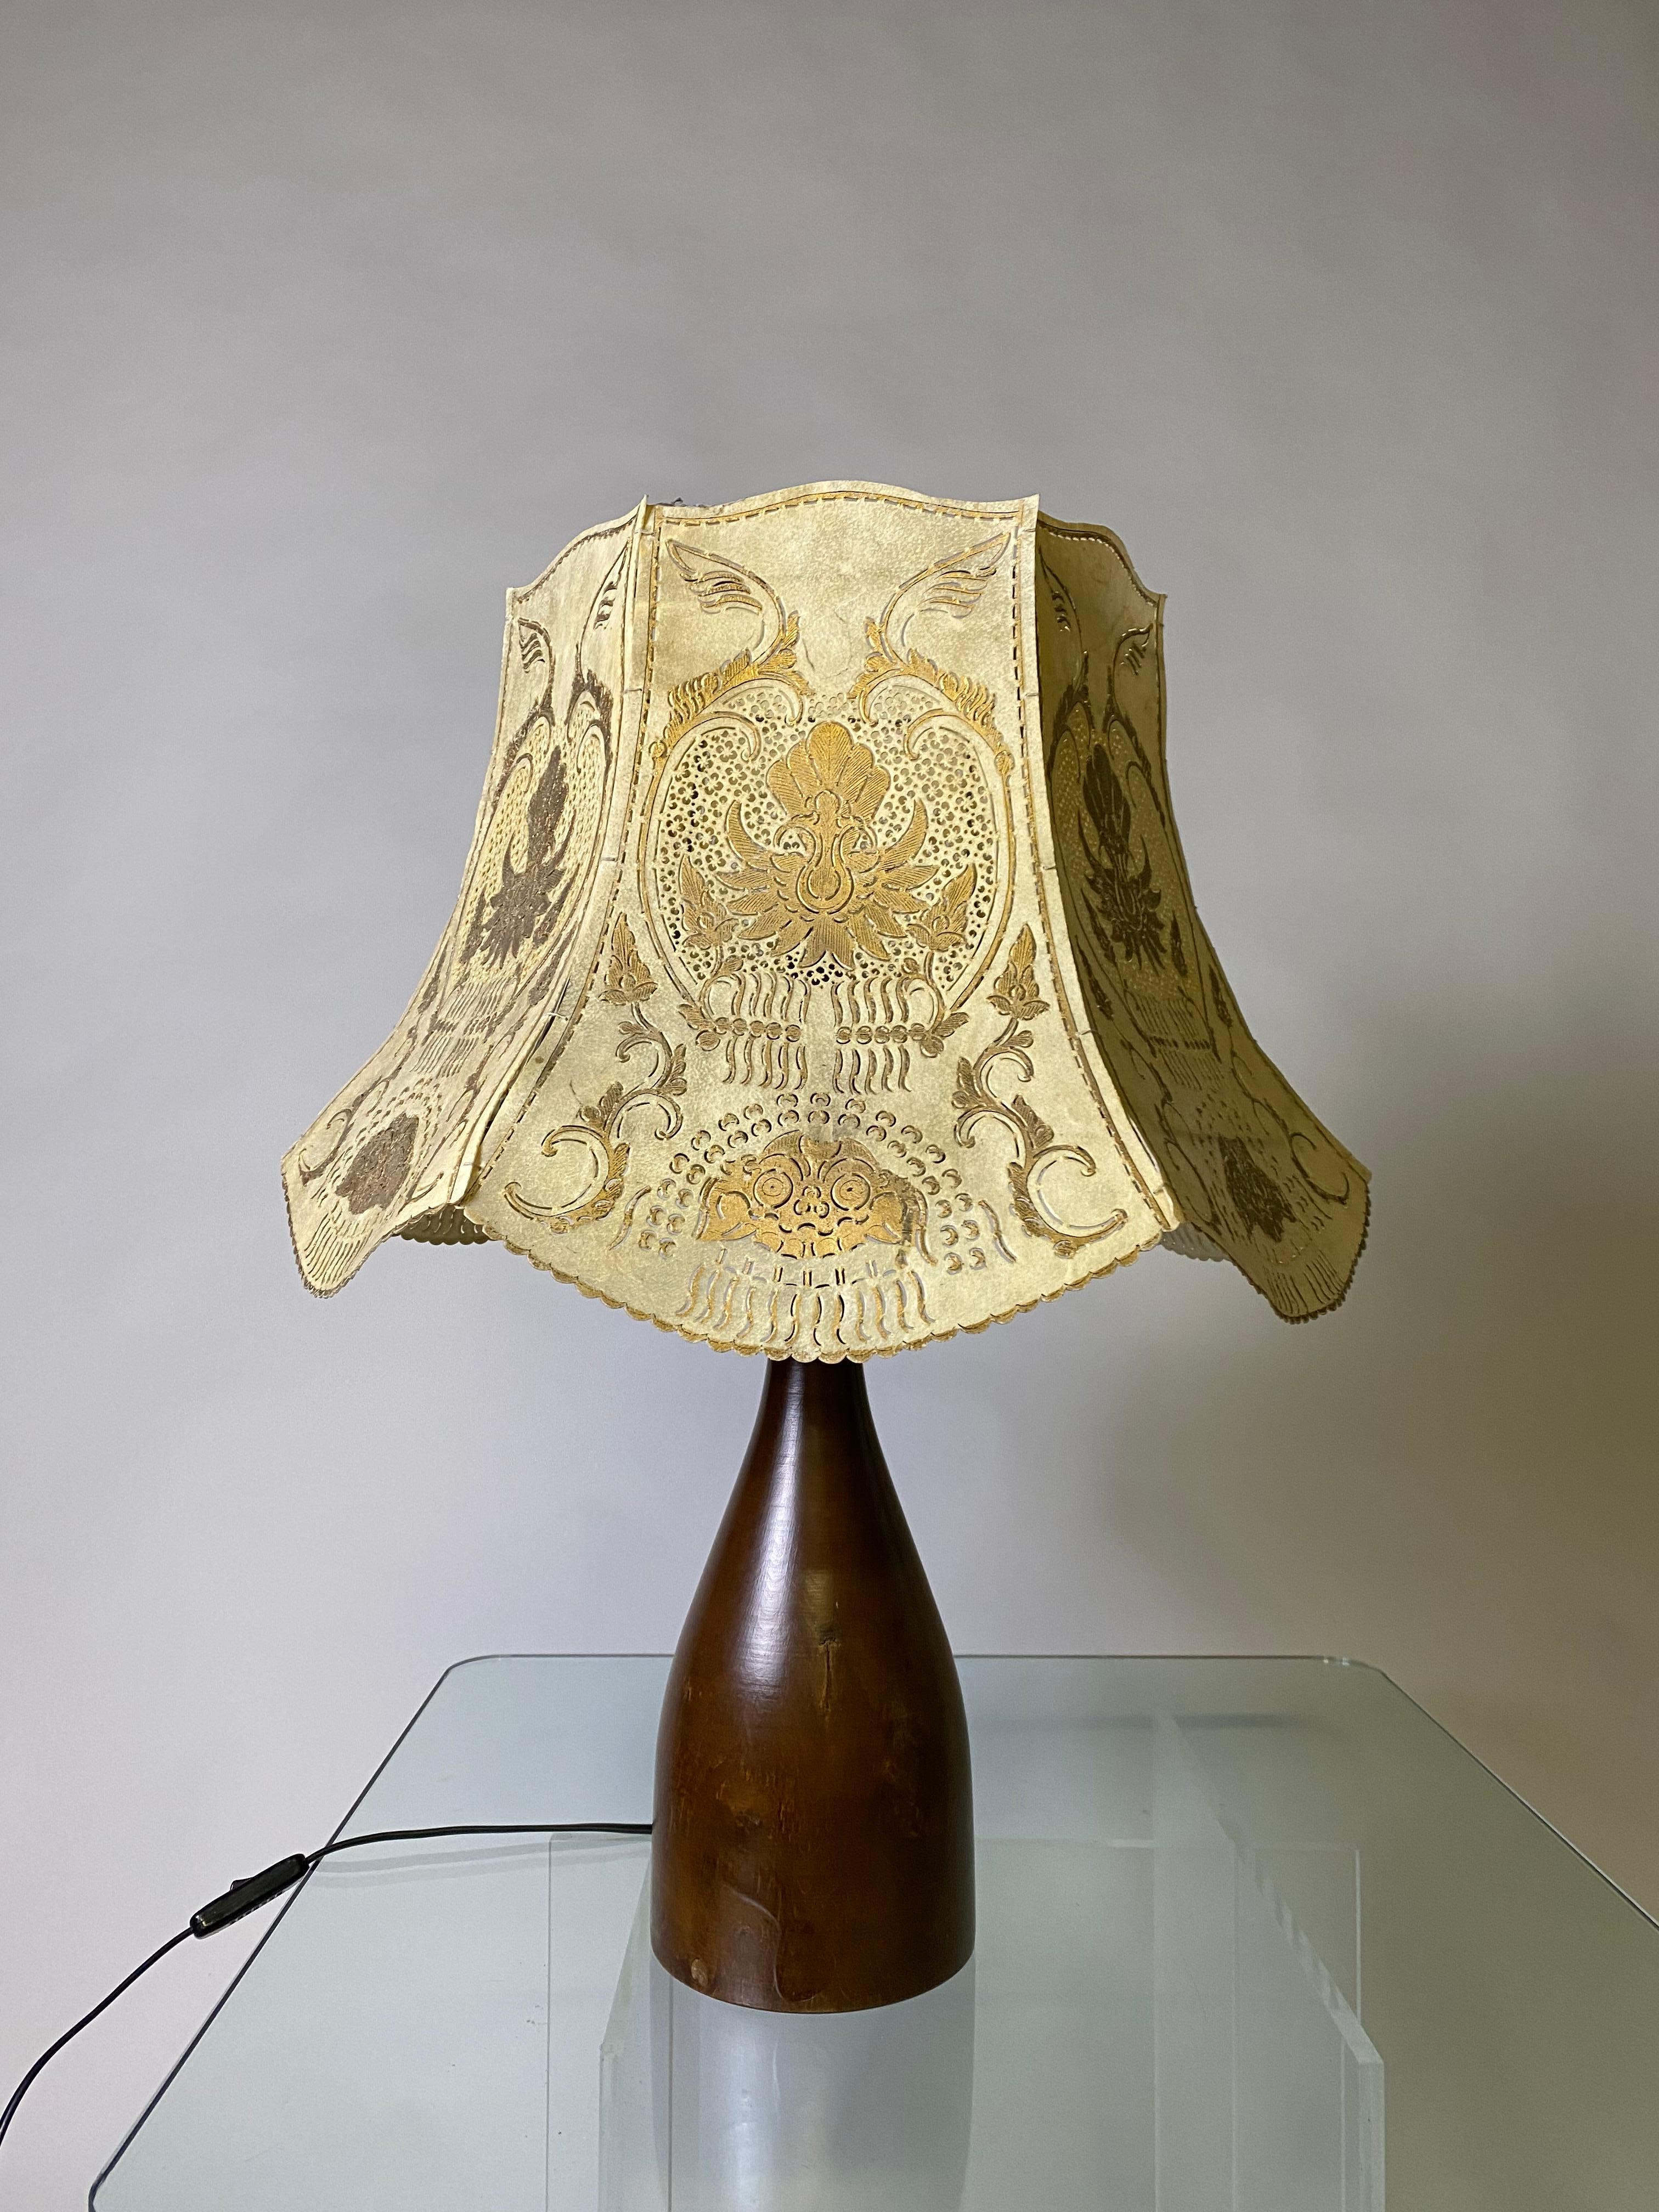 Very rare table lamp from the 70's. The lamp has a solid wooden, varnished base with a gilded pigskin shade.
A real statement piece. It gives a warm light. E14 socket, 110-220 V
Measures: Total height 62 cm, height shade 34 cm, height base 41 cm,